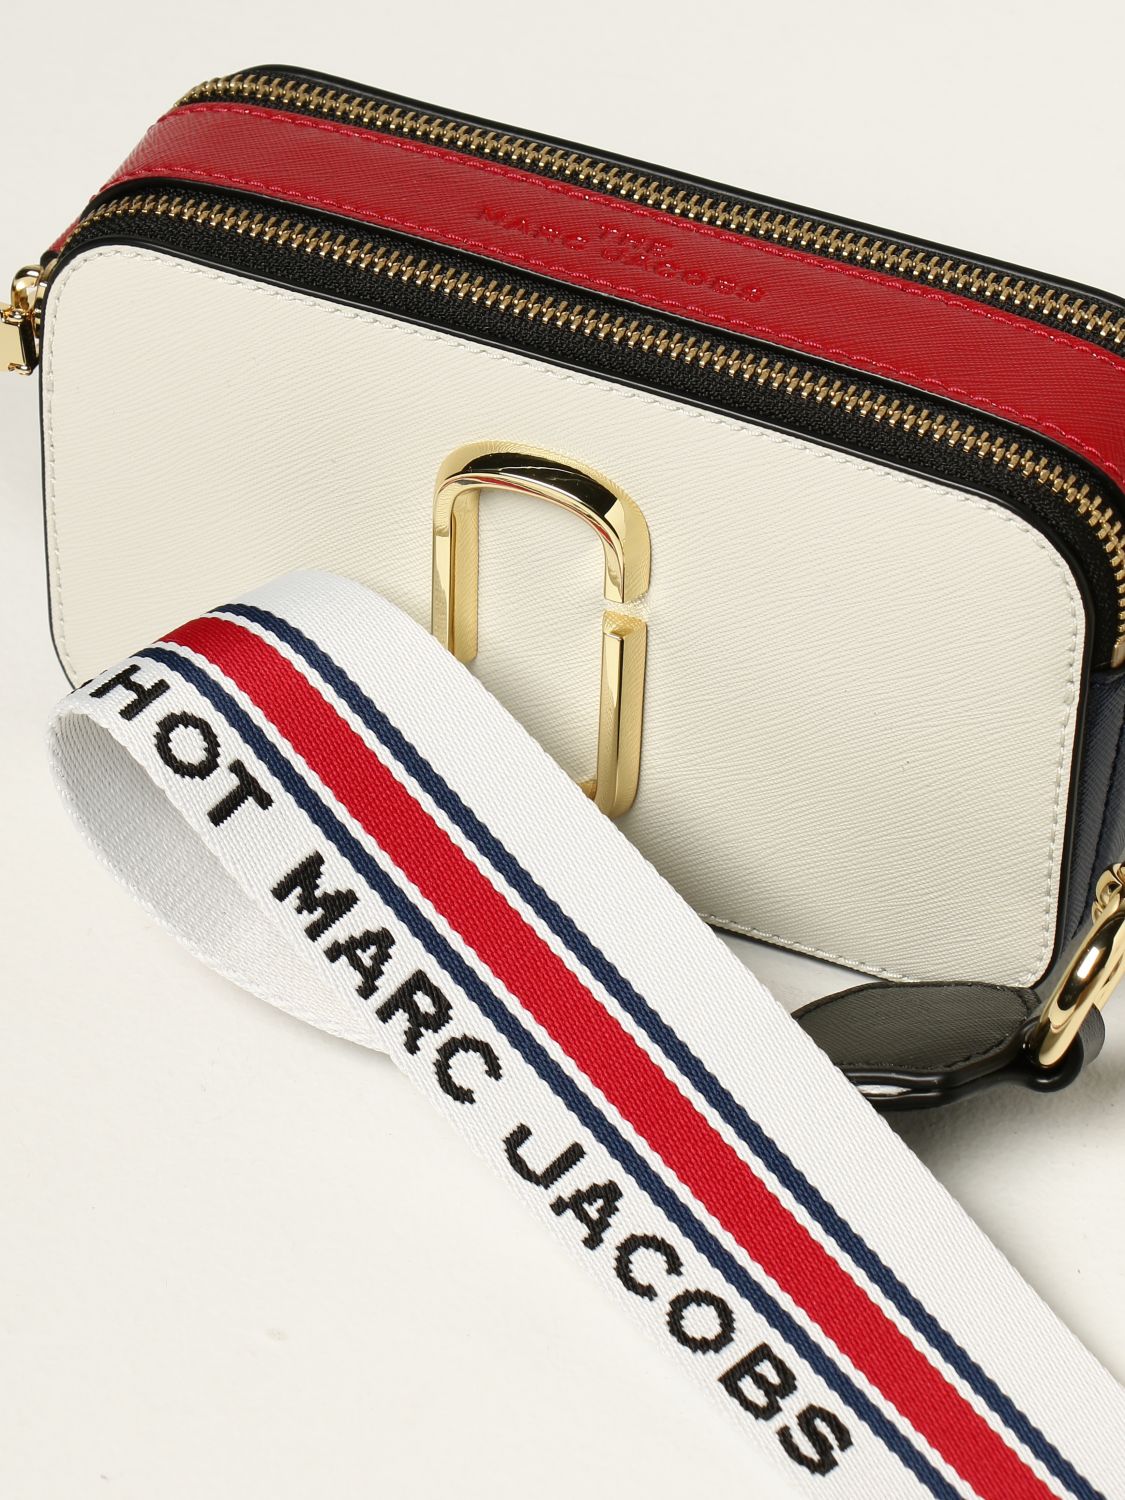 MARC JACOBS: The Snapshot bag in tricolor saffiano leather - White